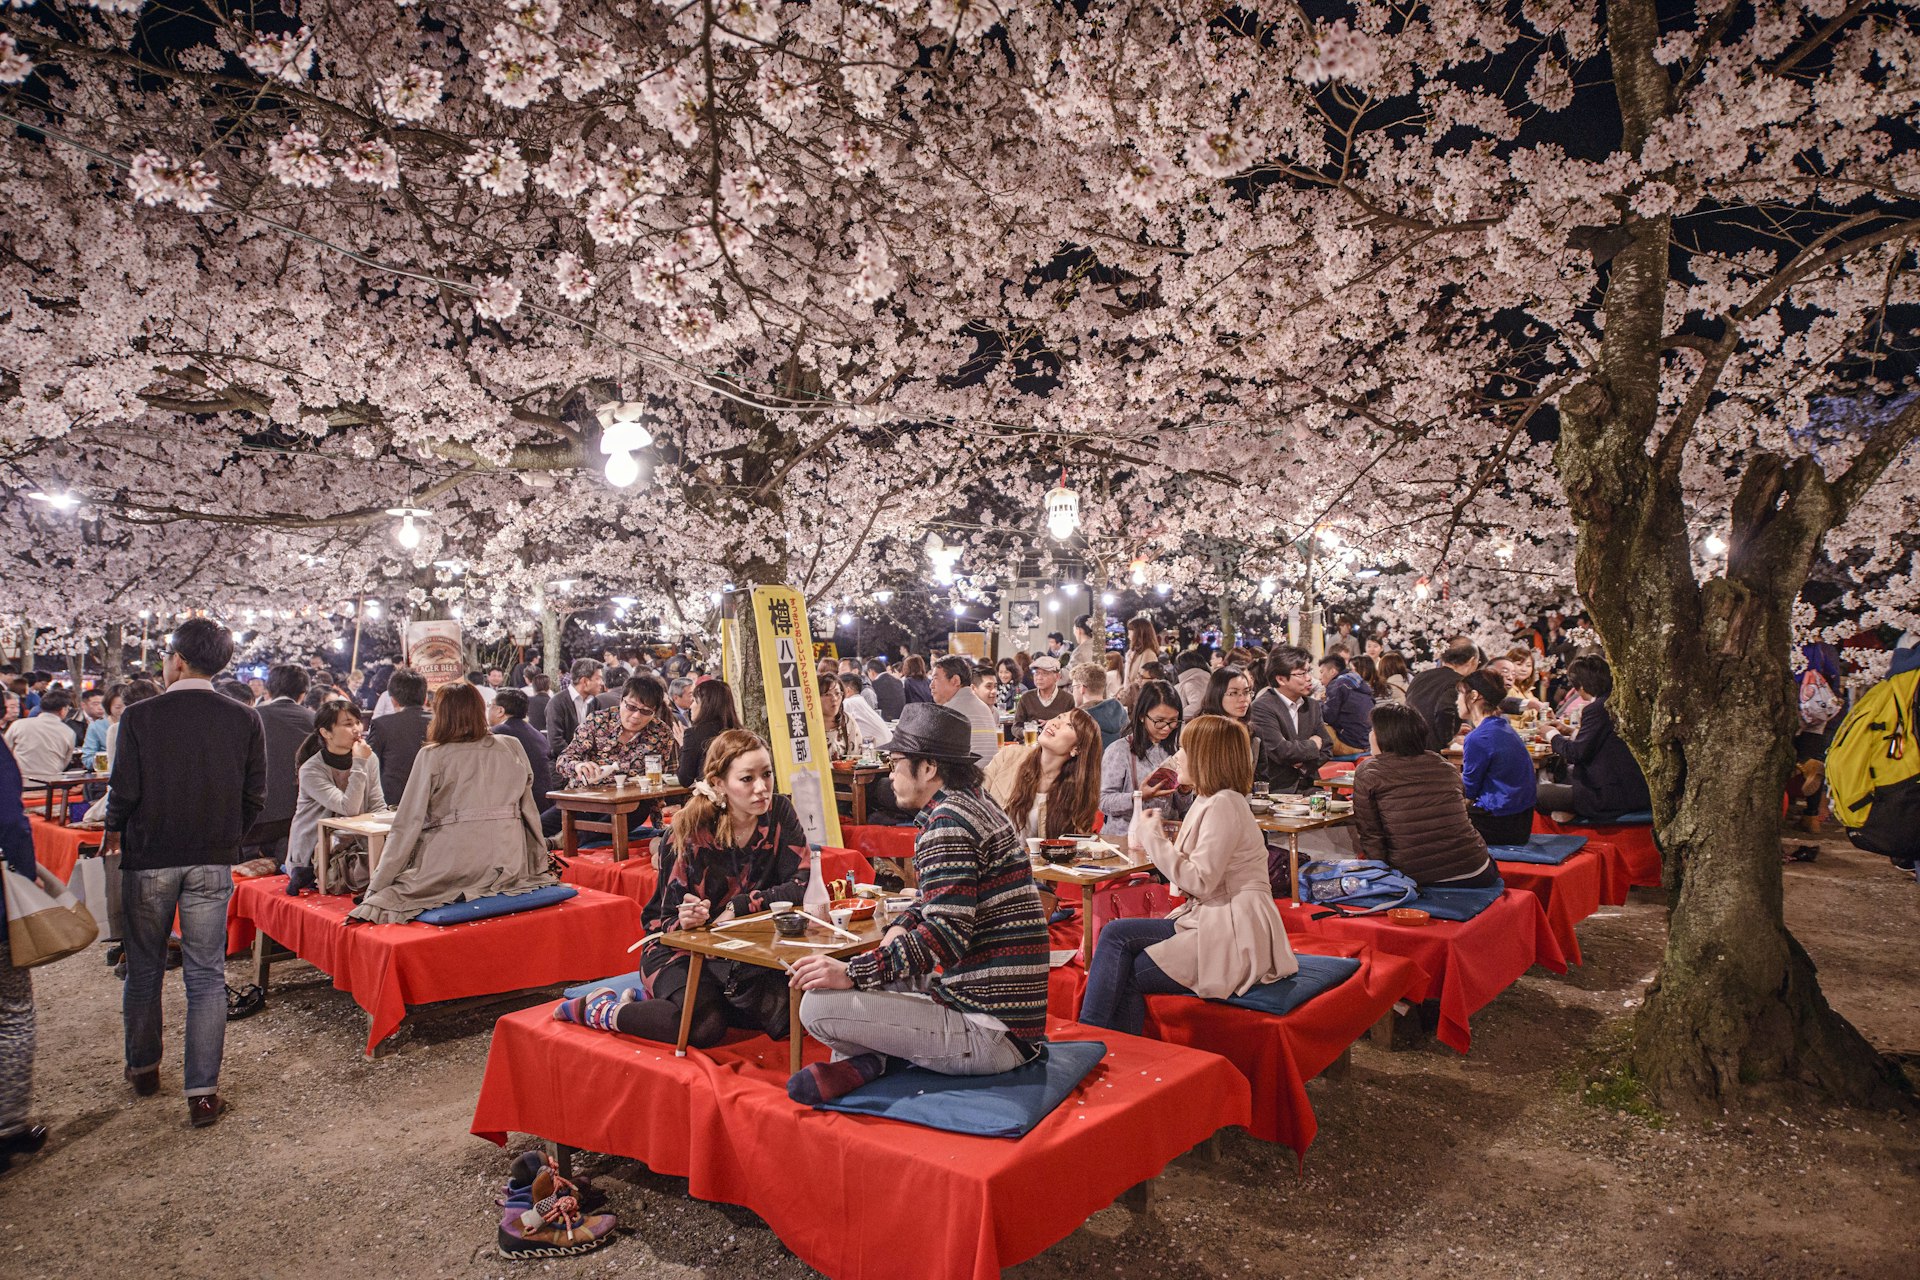 Groups of people picnic at low tables in a park with cherry blossoms in bloom overhead